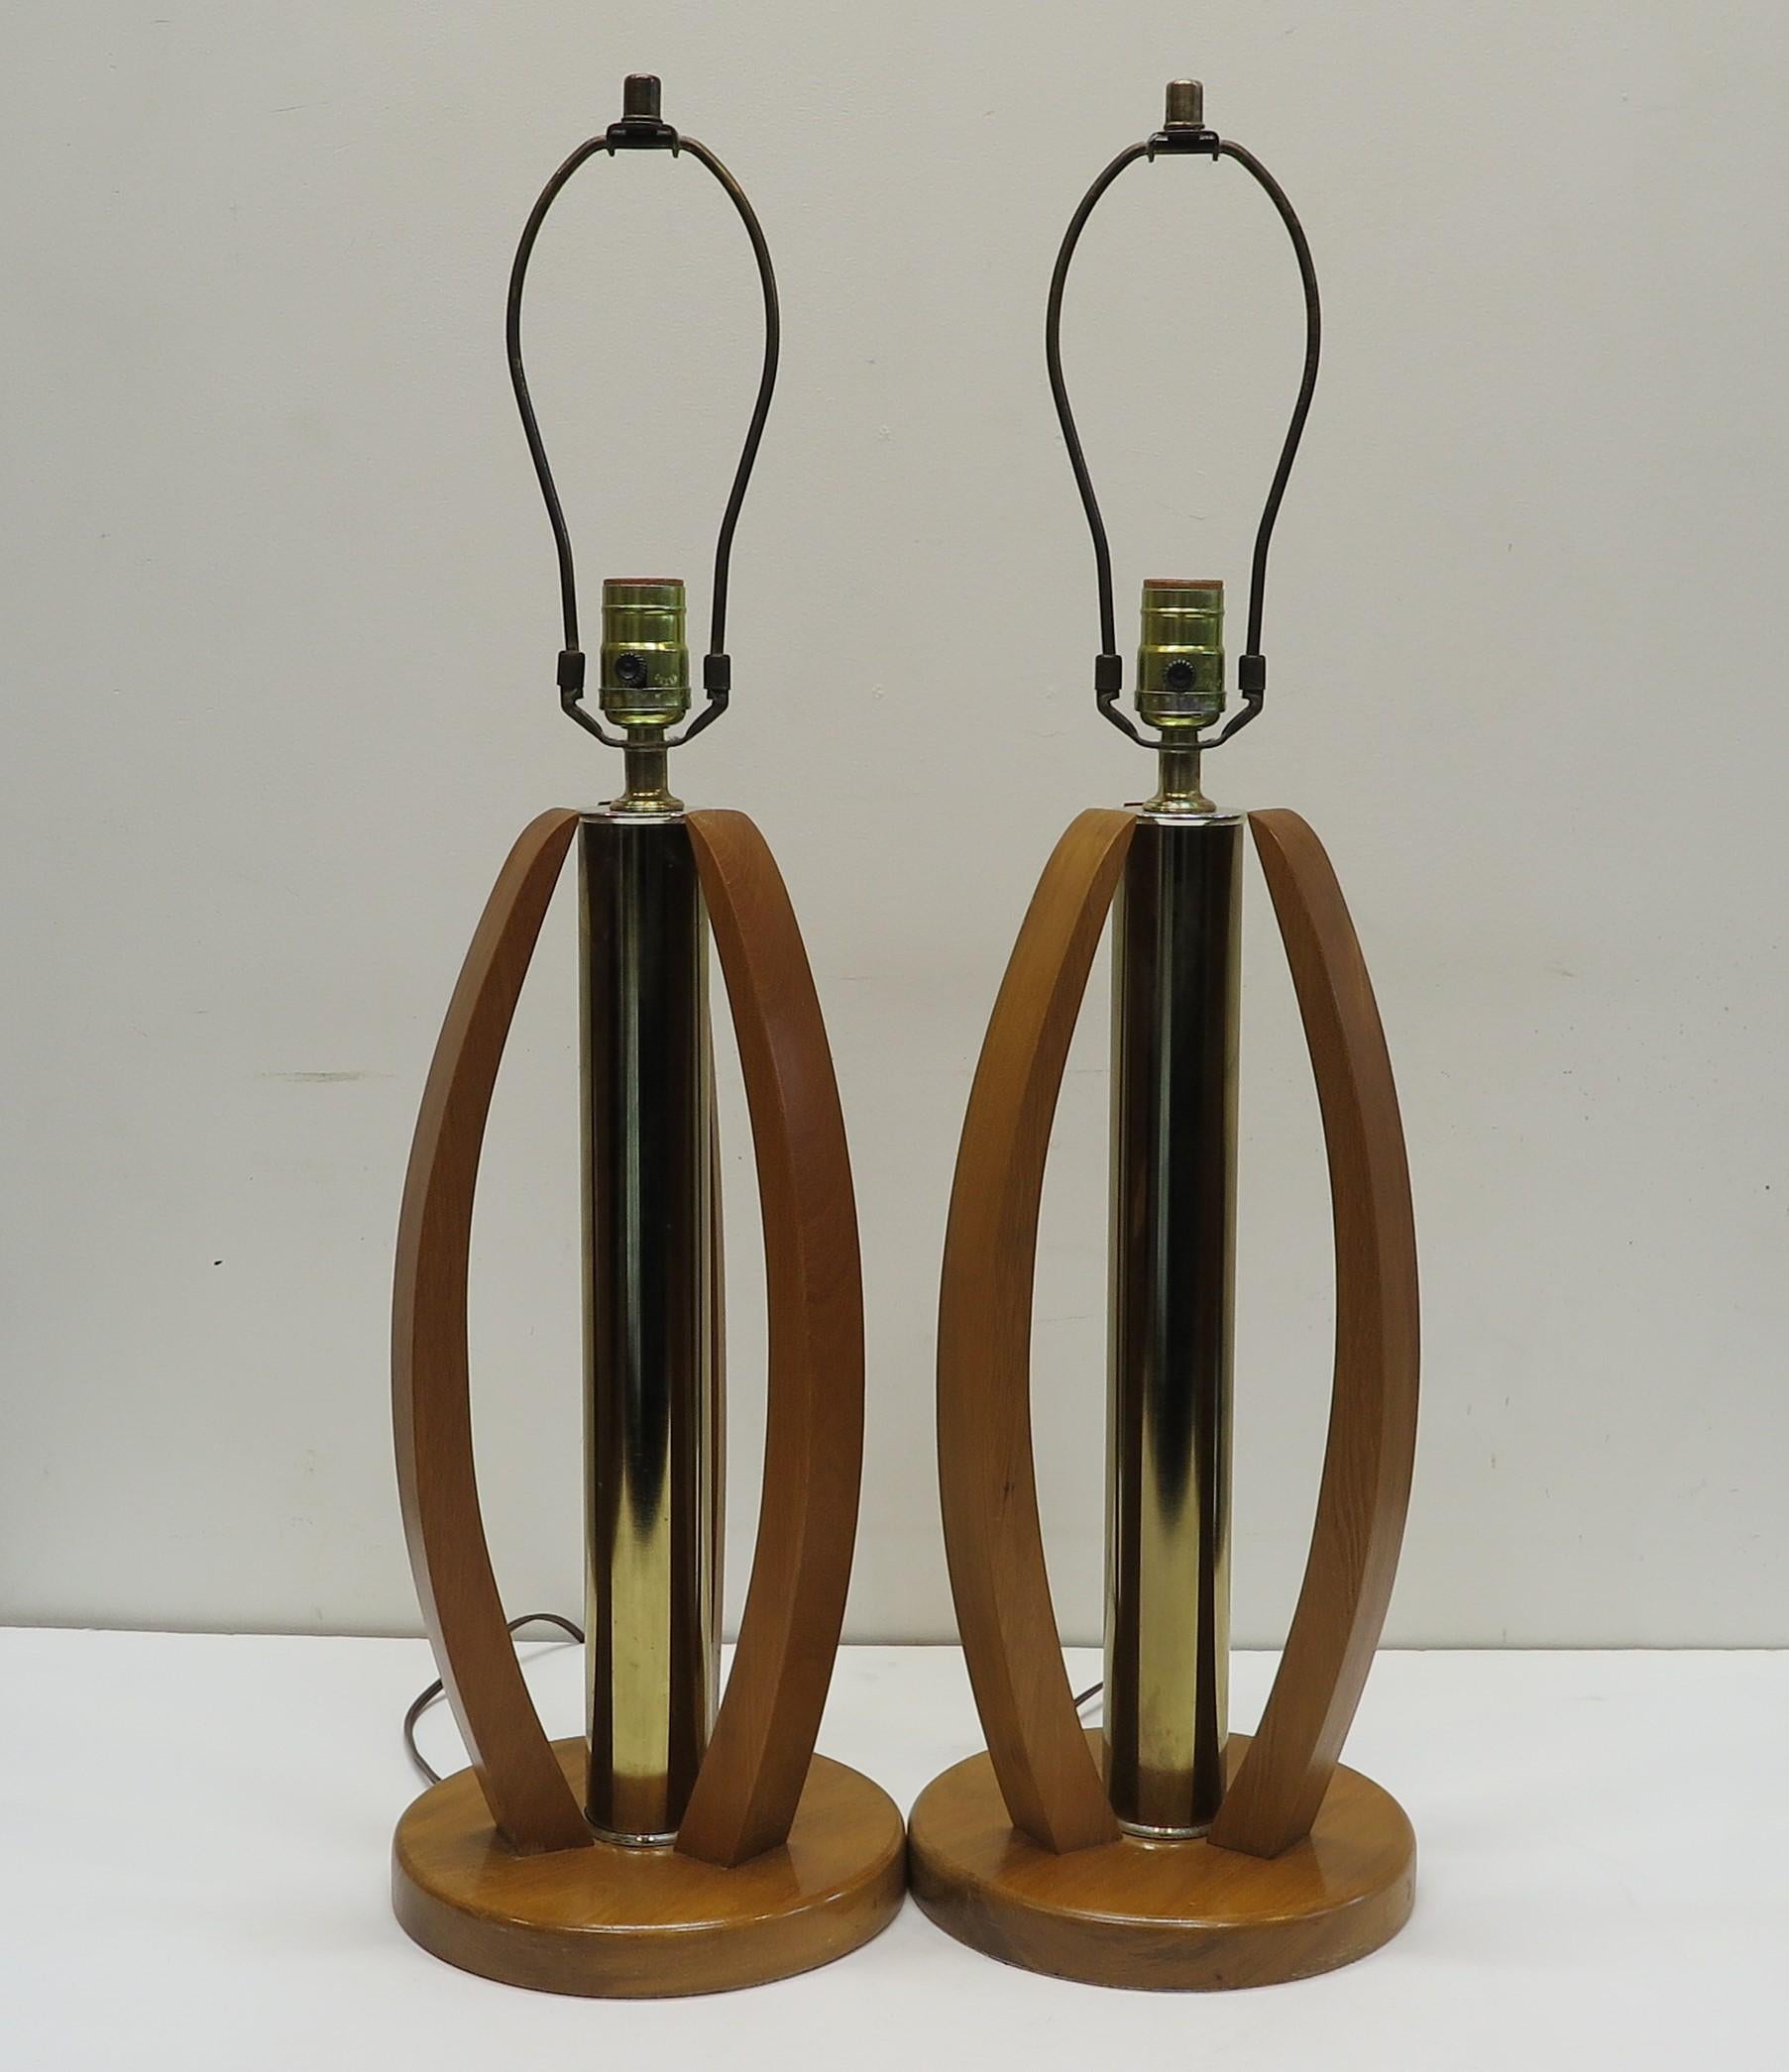 Pair of Mid-Century Modern brass & wood table lamps. Three sculpted wood surrounds with brass column in center, mid century modern table lamps. In good condition operating with a three way switch. American 1960. The listing is for a pair 2 lamps.